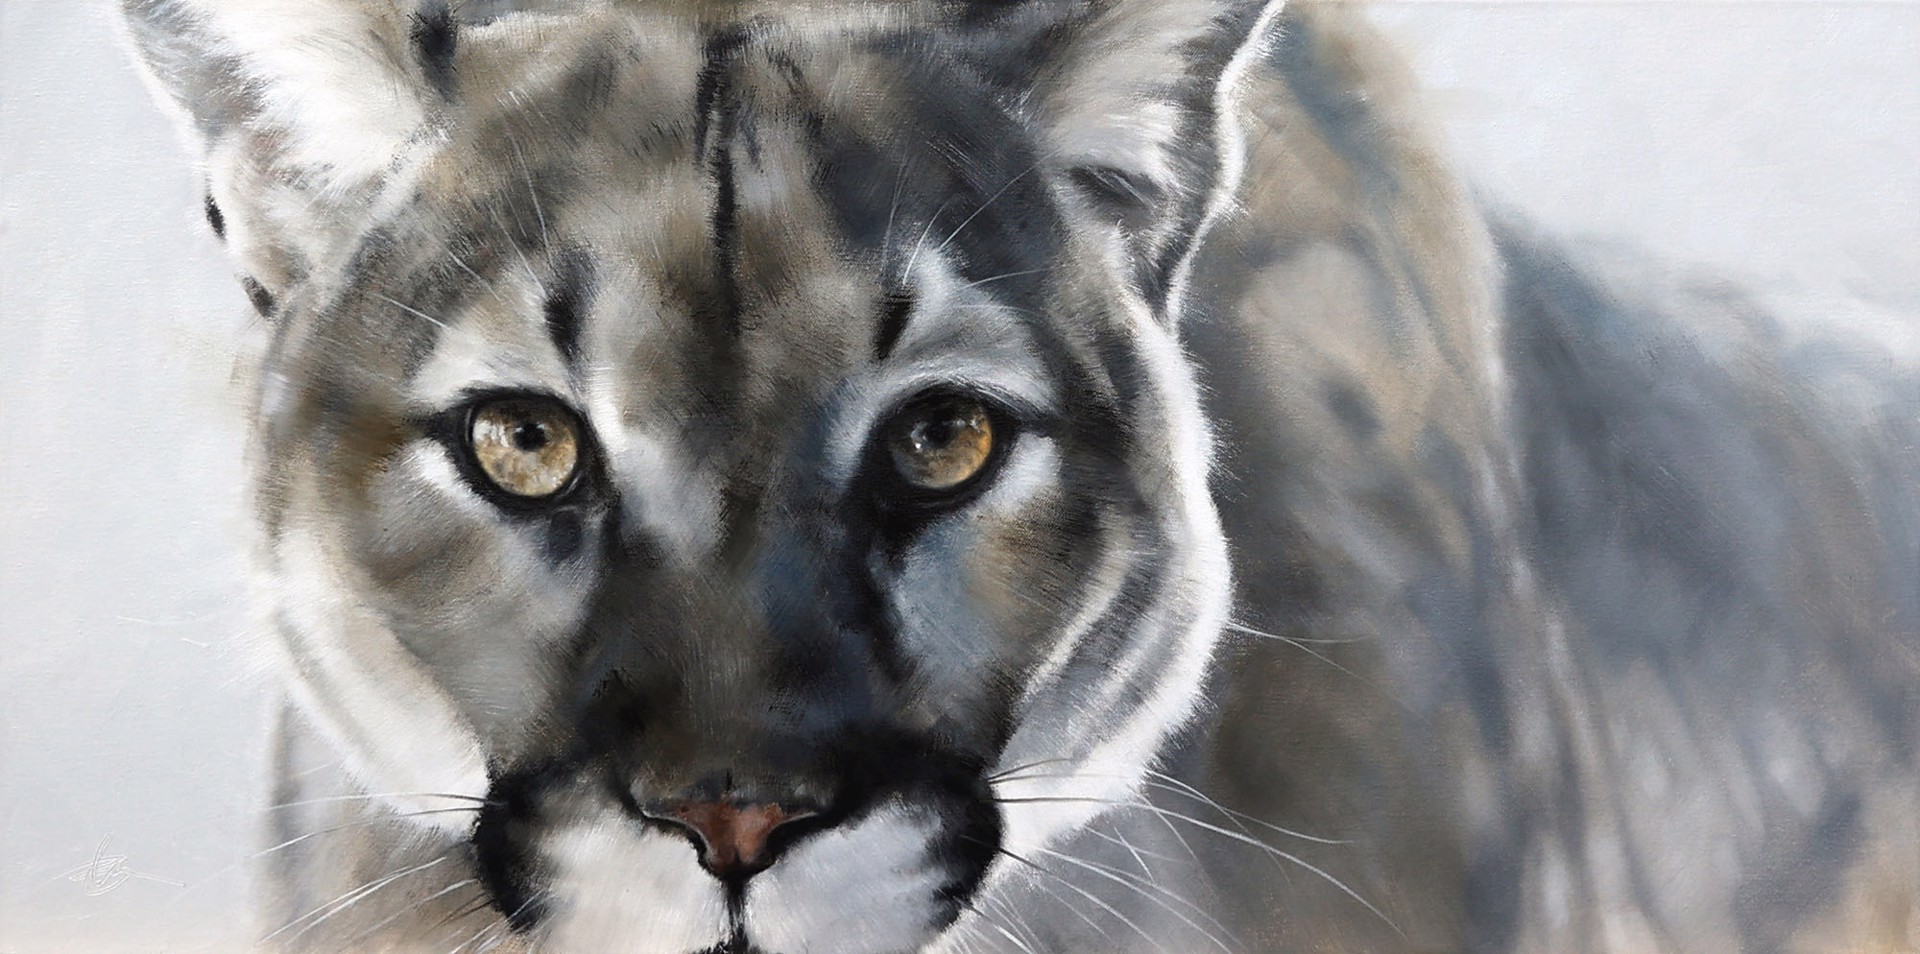 Original Oil Painting By Doyle Hostetler Featuring An Up Close Face On Mountain Lion